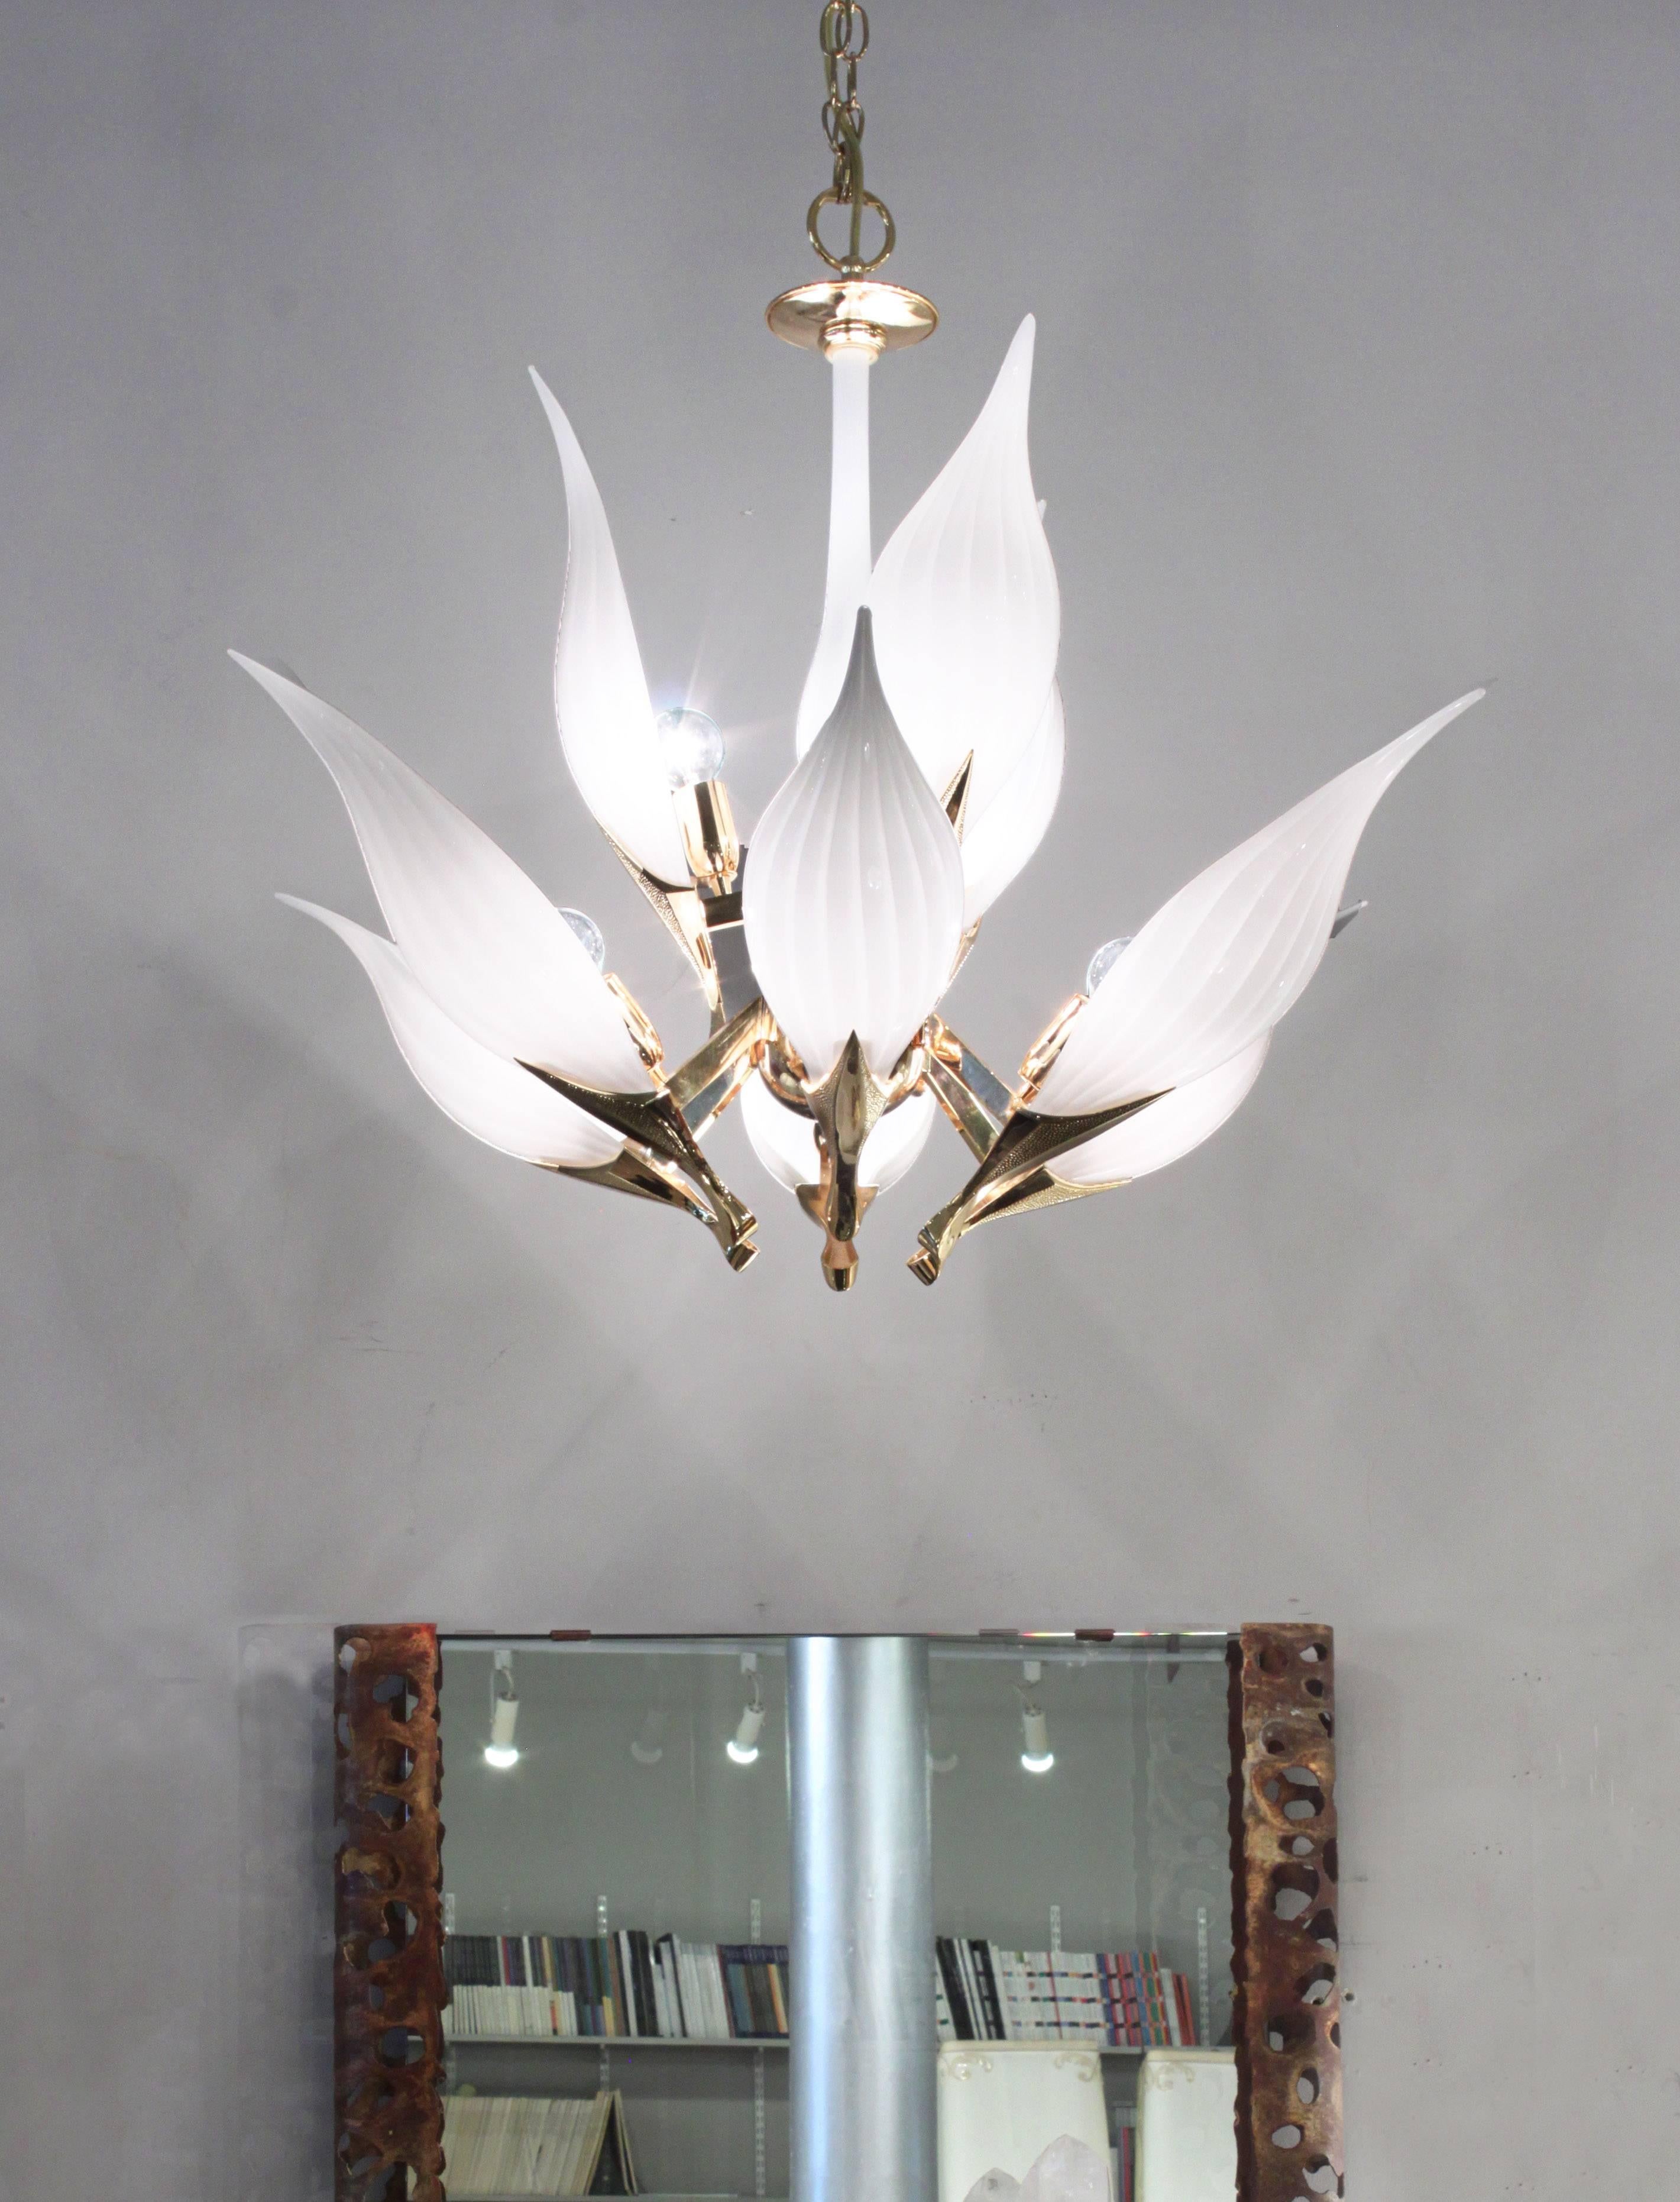 Hand-Crafted Elegant Two-Tier Chandelier with Striated Glass Pedals by Franco Luce